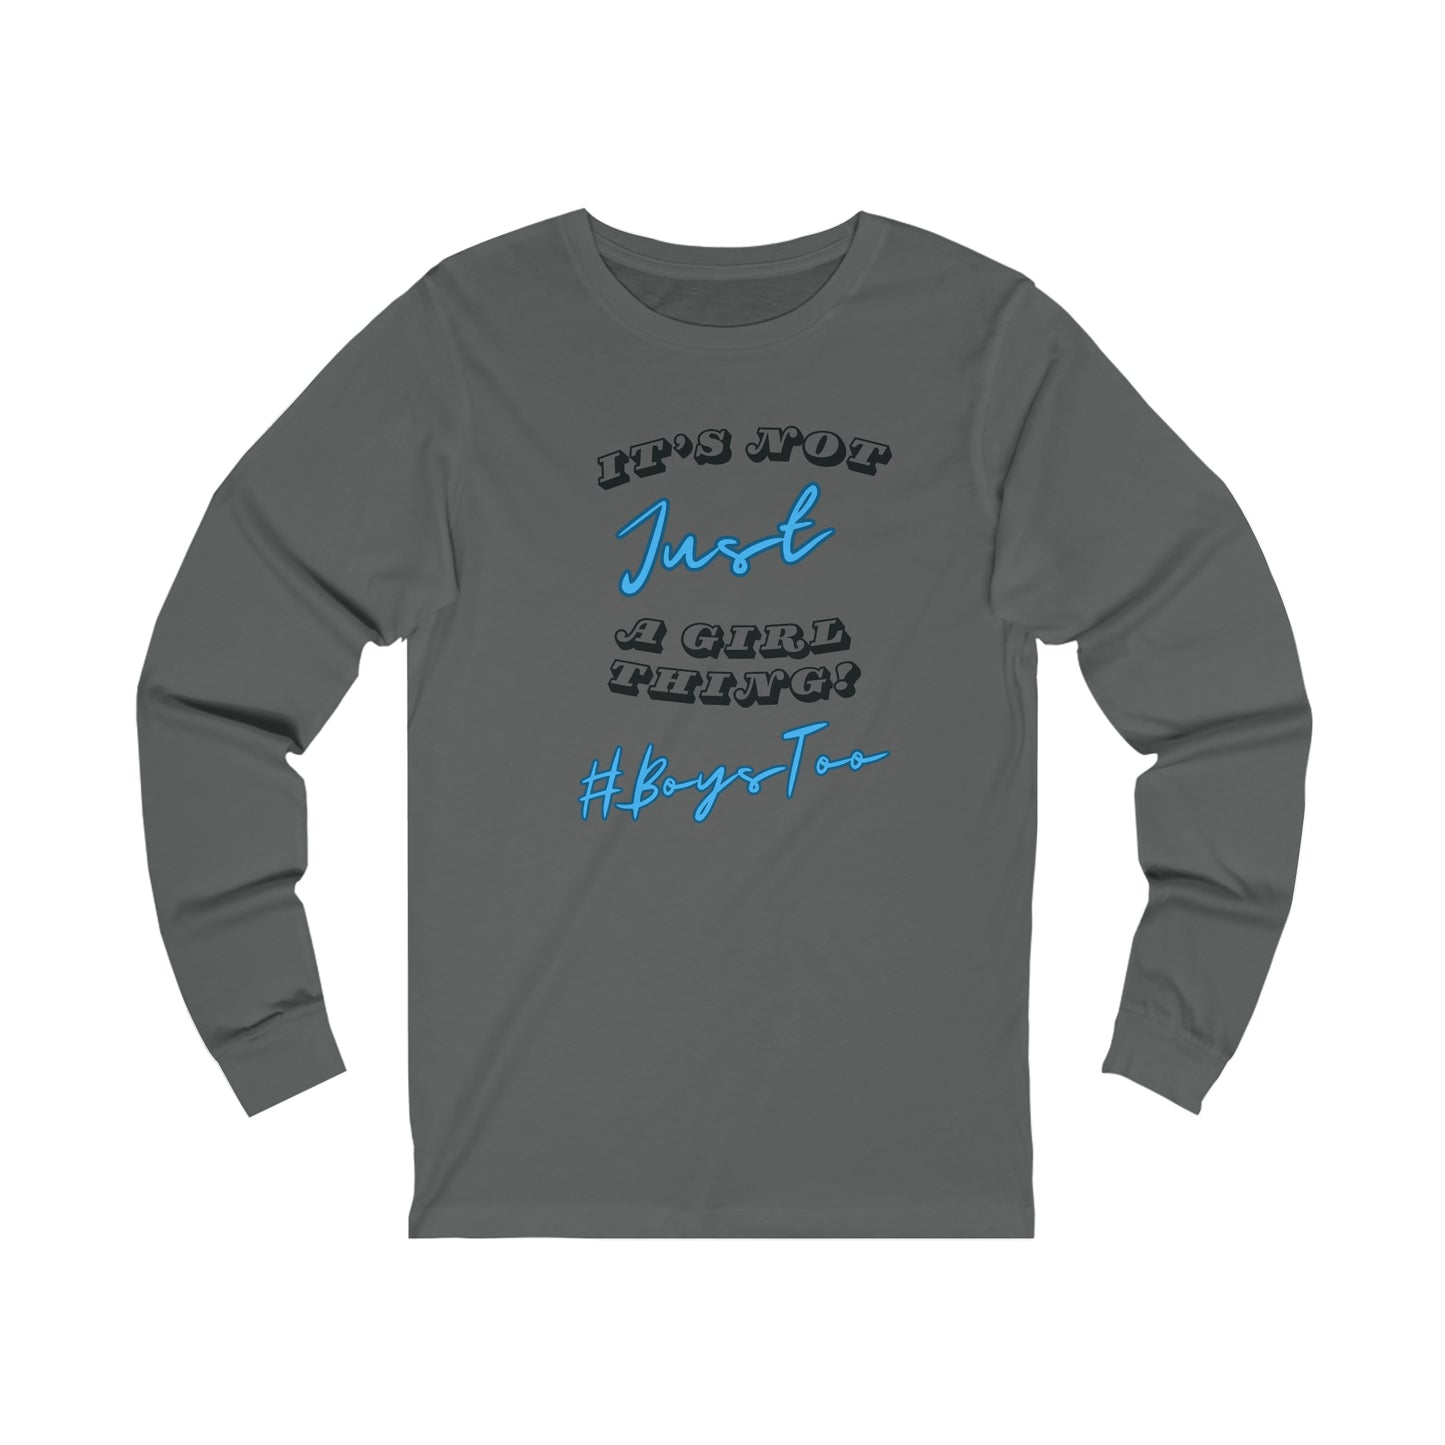 Not JUST a Girl Thing ~ Blue txt v2... Unisex Jersey Long Sleeve Tee